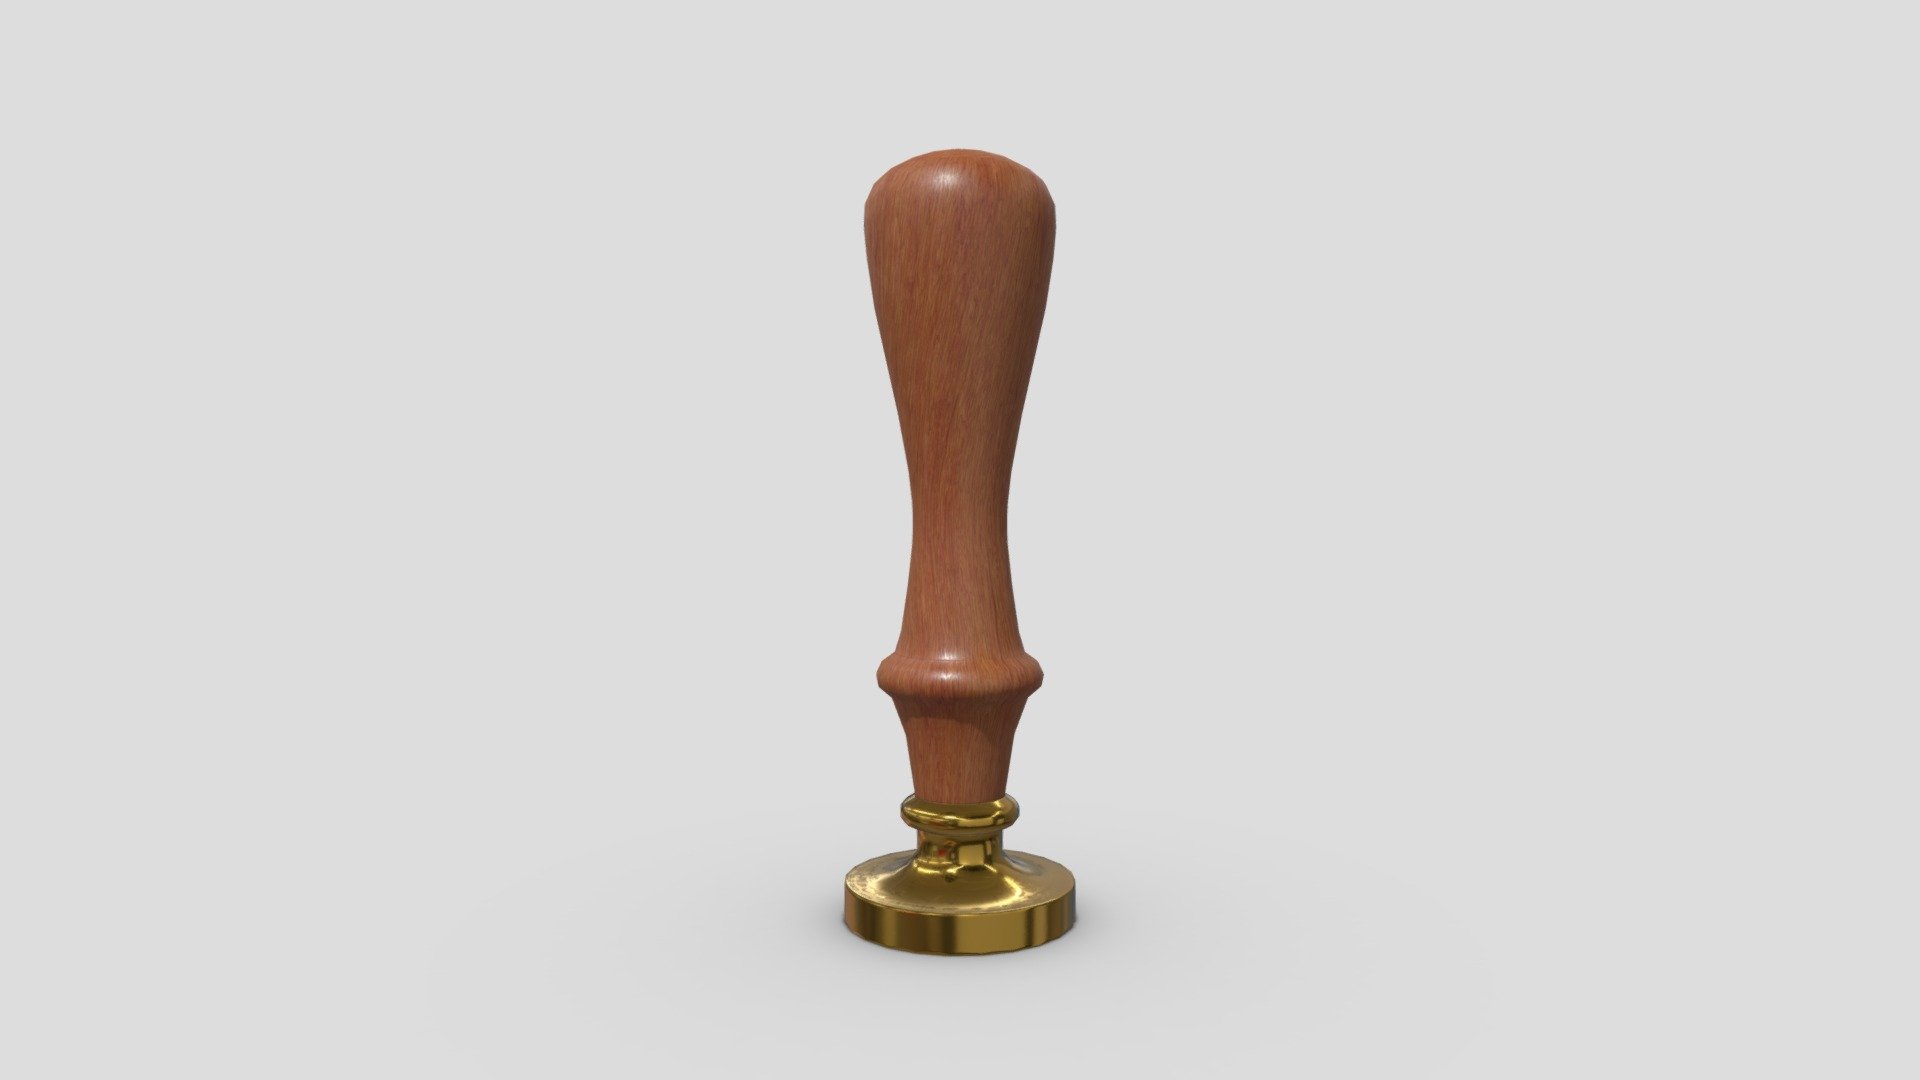 ‘Stamp it in wax to hold some in between!’

● 4096 x 4096 PBR textures

● normal map is baked from the high poly model

Please do not hesitate to contact with me. I will be happy to help you.

Contact: plaggy.net@gmail.com

Formats: .fbx, .dae, .max, .obj, .mtl, .png, .glTF, .USDZ Polygon: 768 Vertices: 770 Textures: Yes, PBR (ao, albedo, metal, normal, ORM, rough) Materials: Yes UV Mapped: Yes Unwrapped UVs: Yes (non overlapping) - Wax Stamp - Buy Royalty Free 3D model by plaggy 3d model